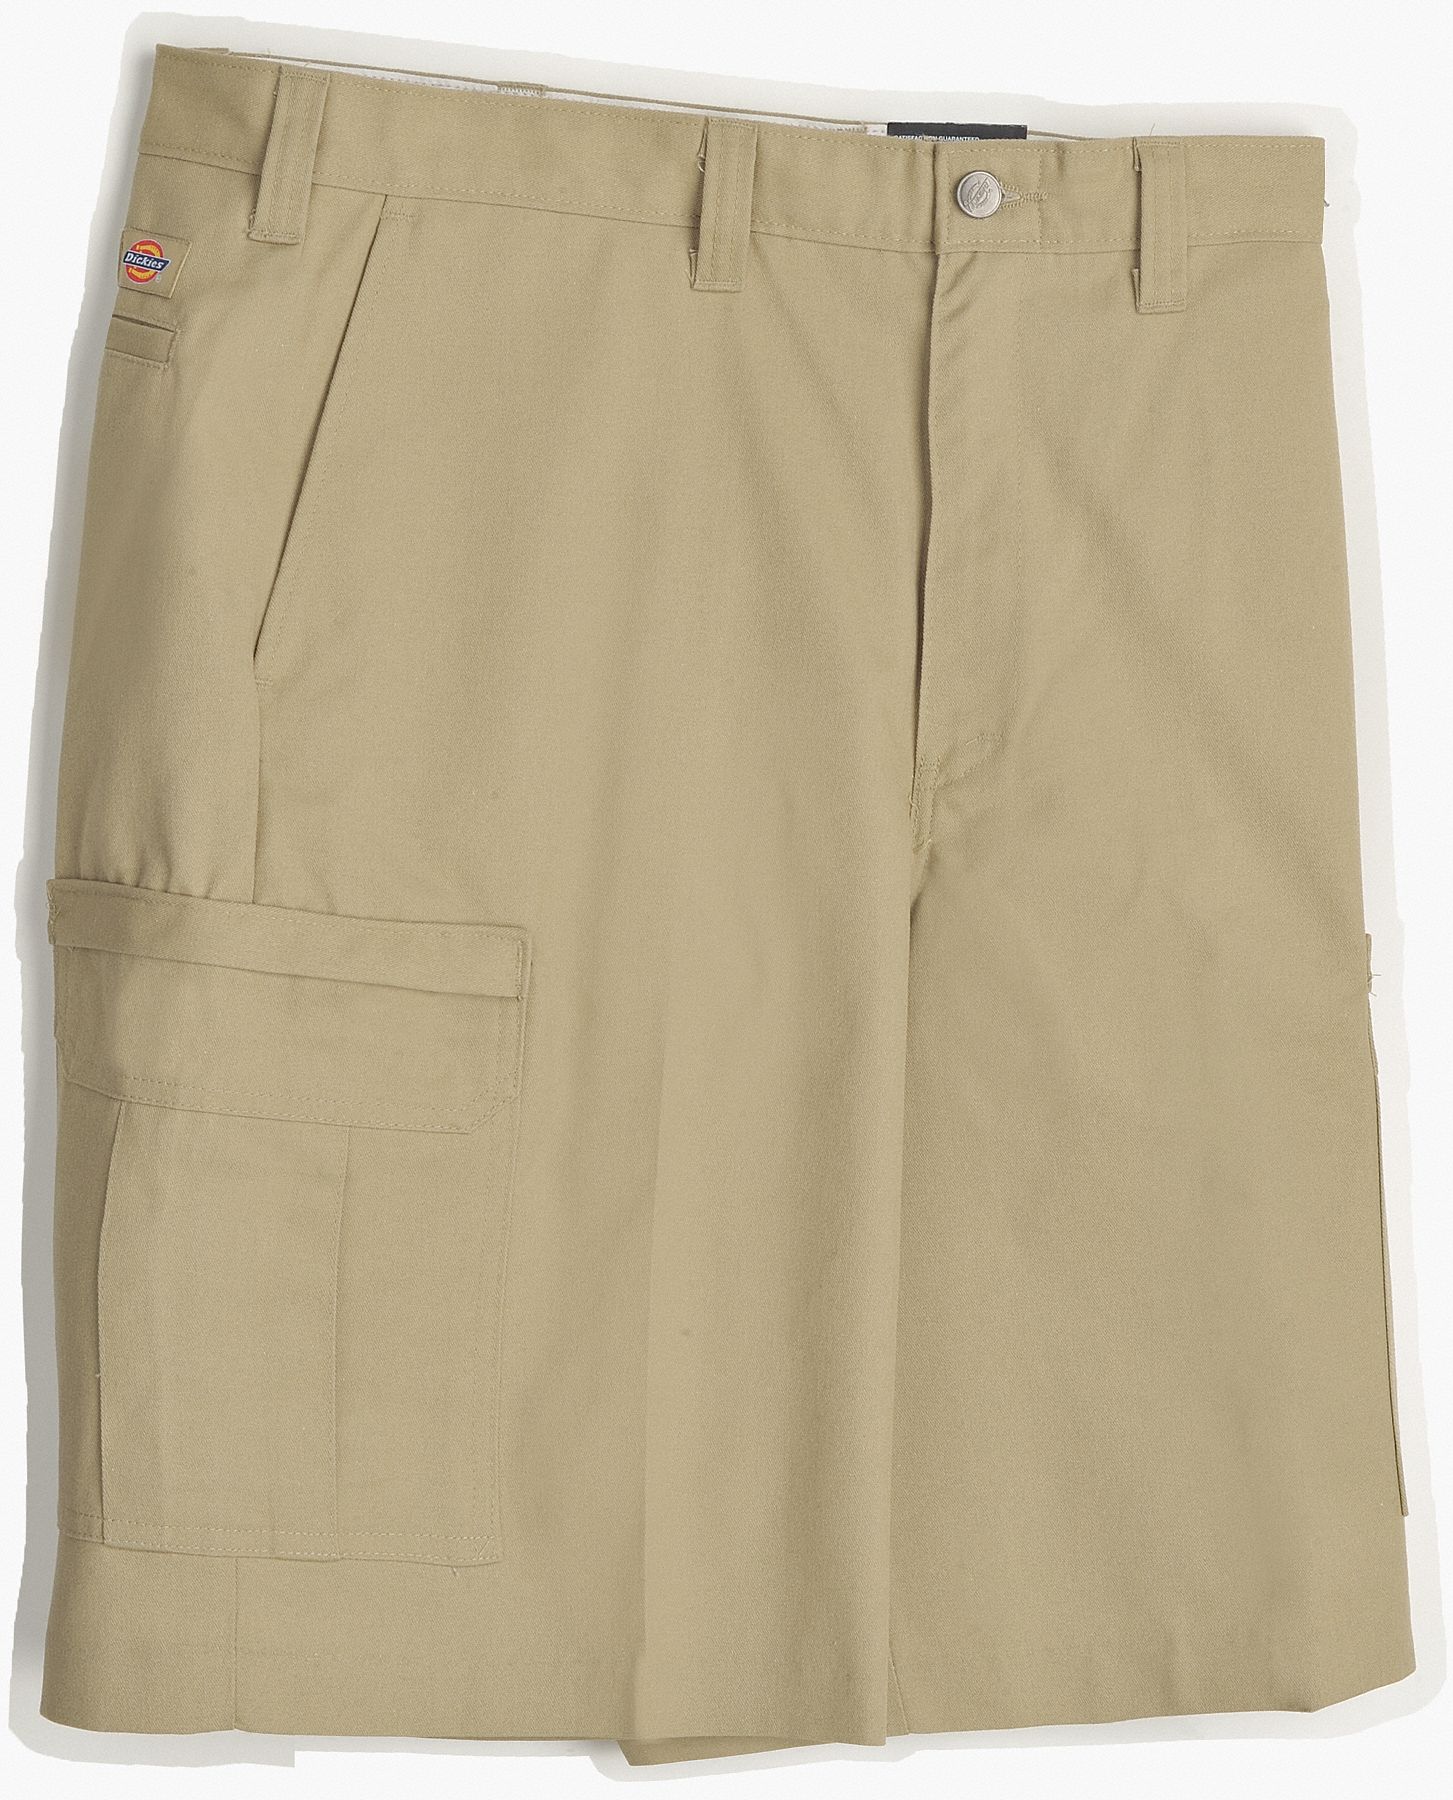 DICKIES Khaki Cargo Shorts, Poly/Cotton Twill, Fits Waist Size 30 in ...